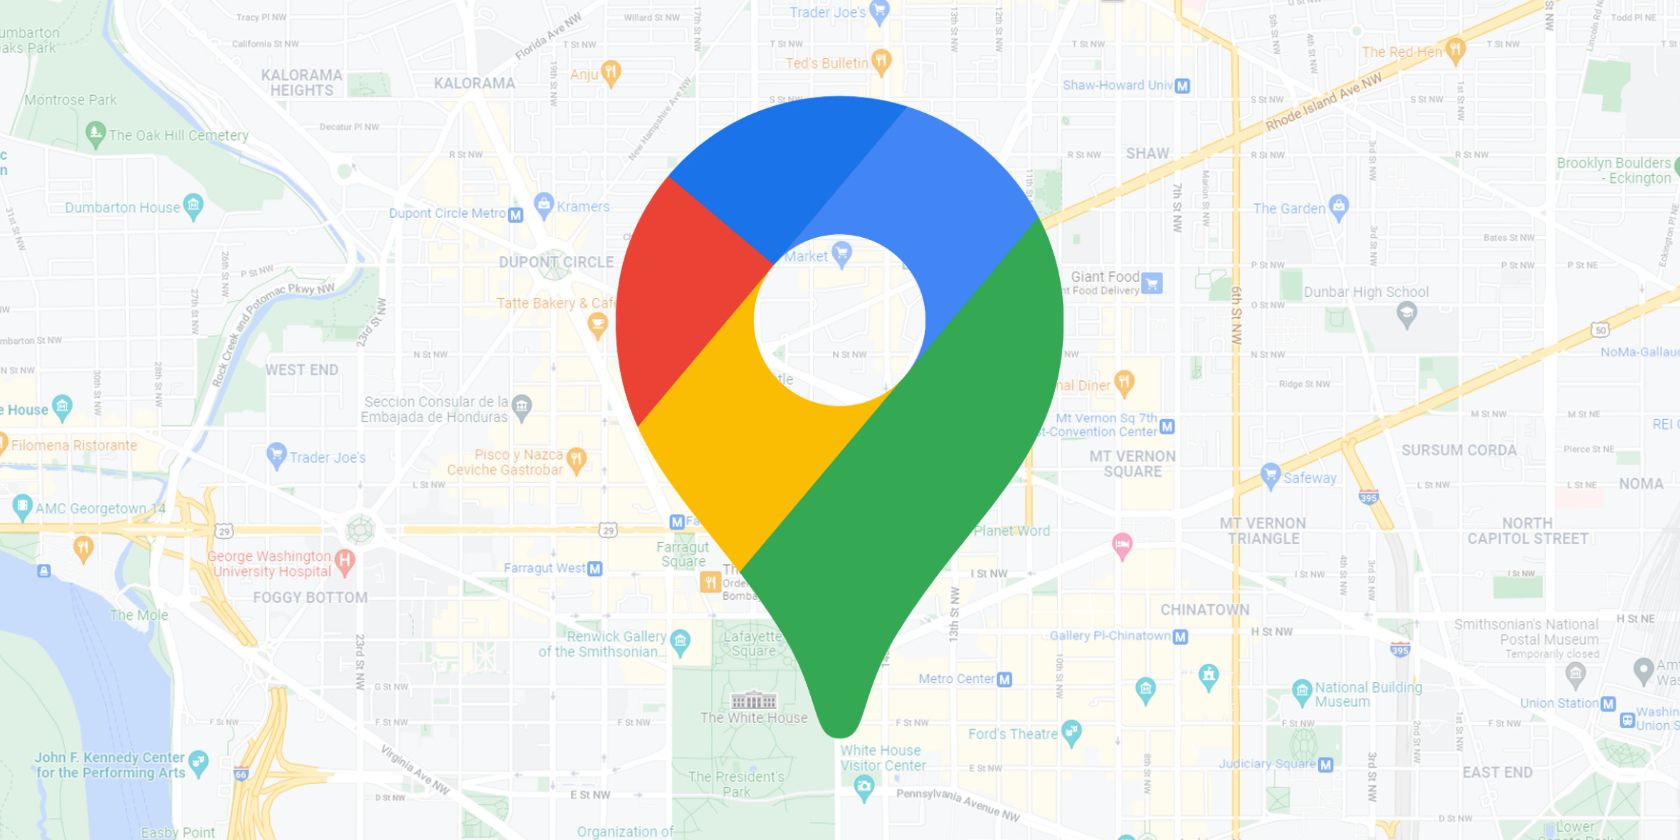 An illustrative image for Google Maps